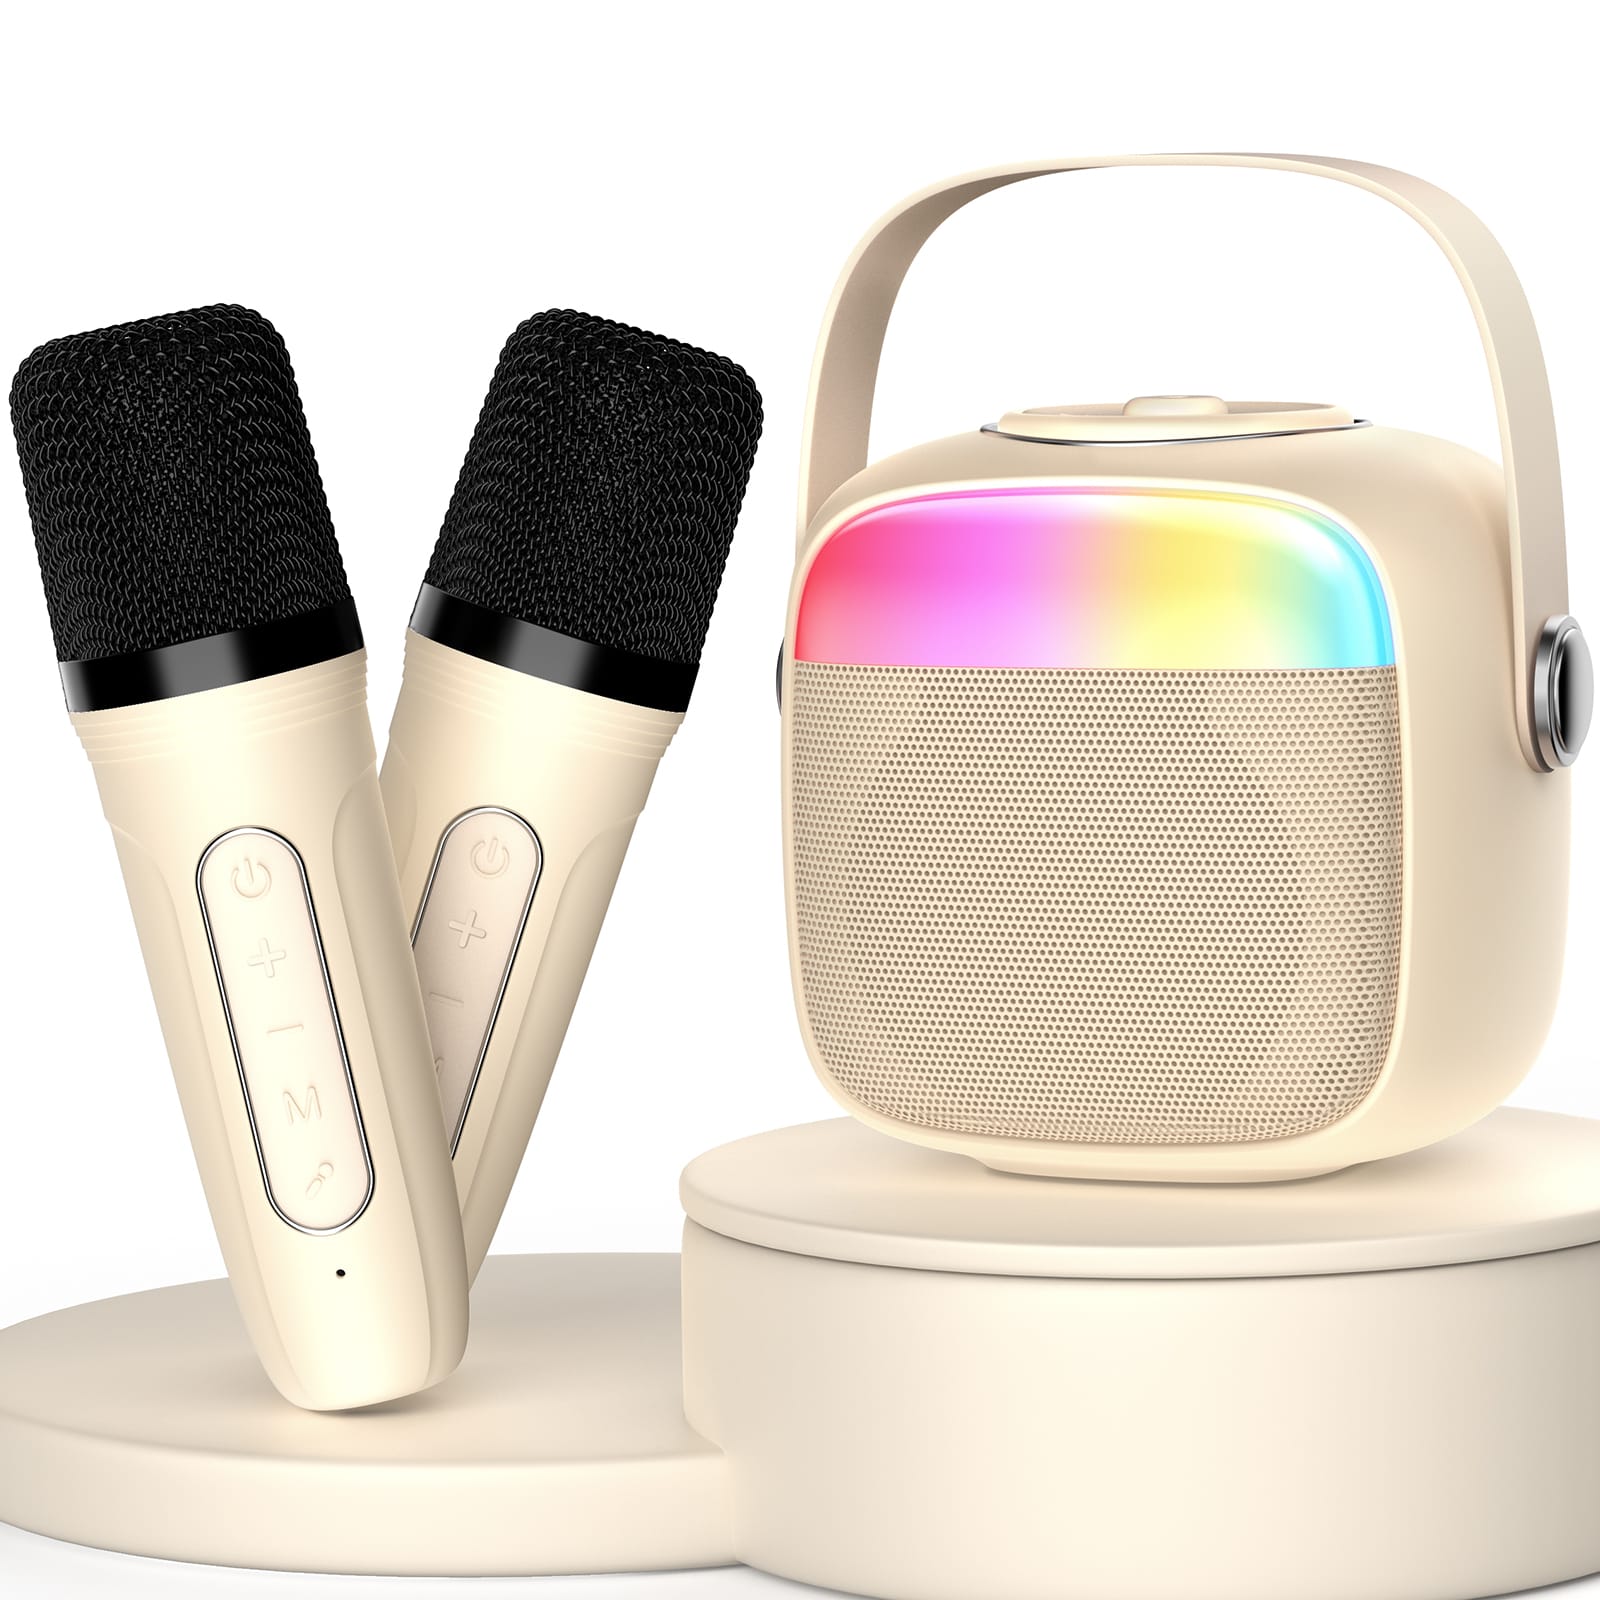 JYX D22 Karaoke Machine in Beige Color with Two Microphones